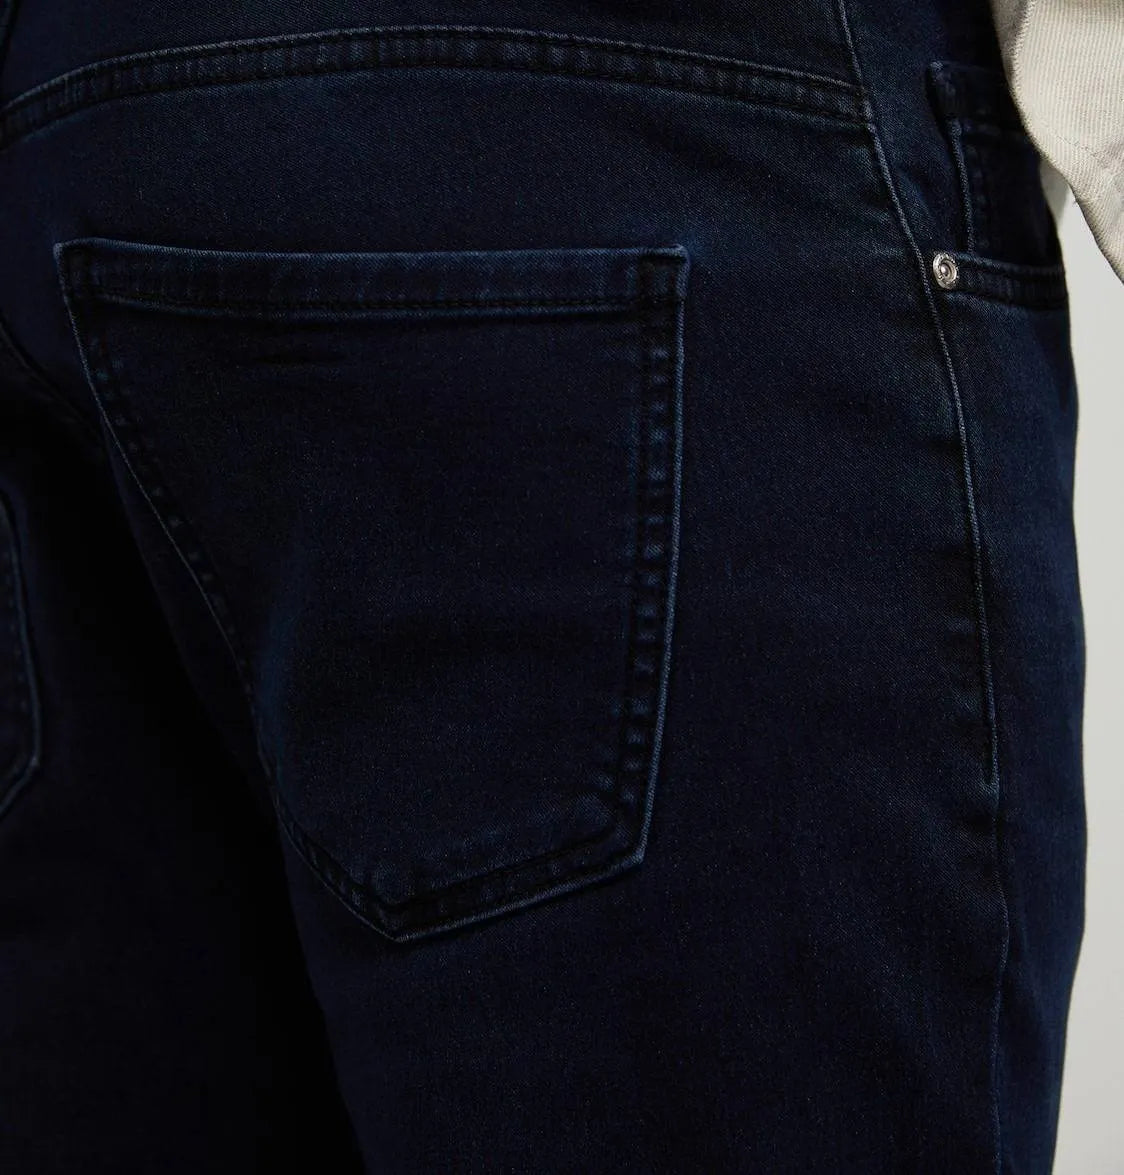 Pull&Bear Carrot Fit Jeans: Modern cool in dark blue, relaxed fit at thighs & tapered below (mention size if relevant).Designed to highlight your figure without being restrictive.Pull&Bear, carrot fit, dark blue, comfortable, modern, trendy.